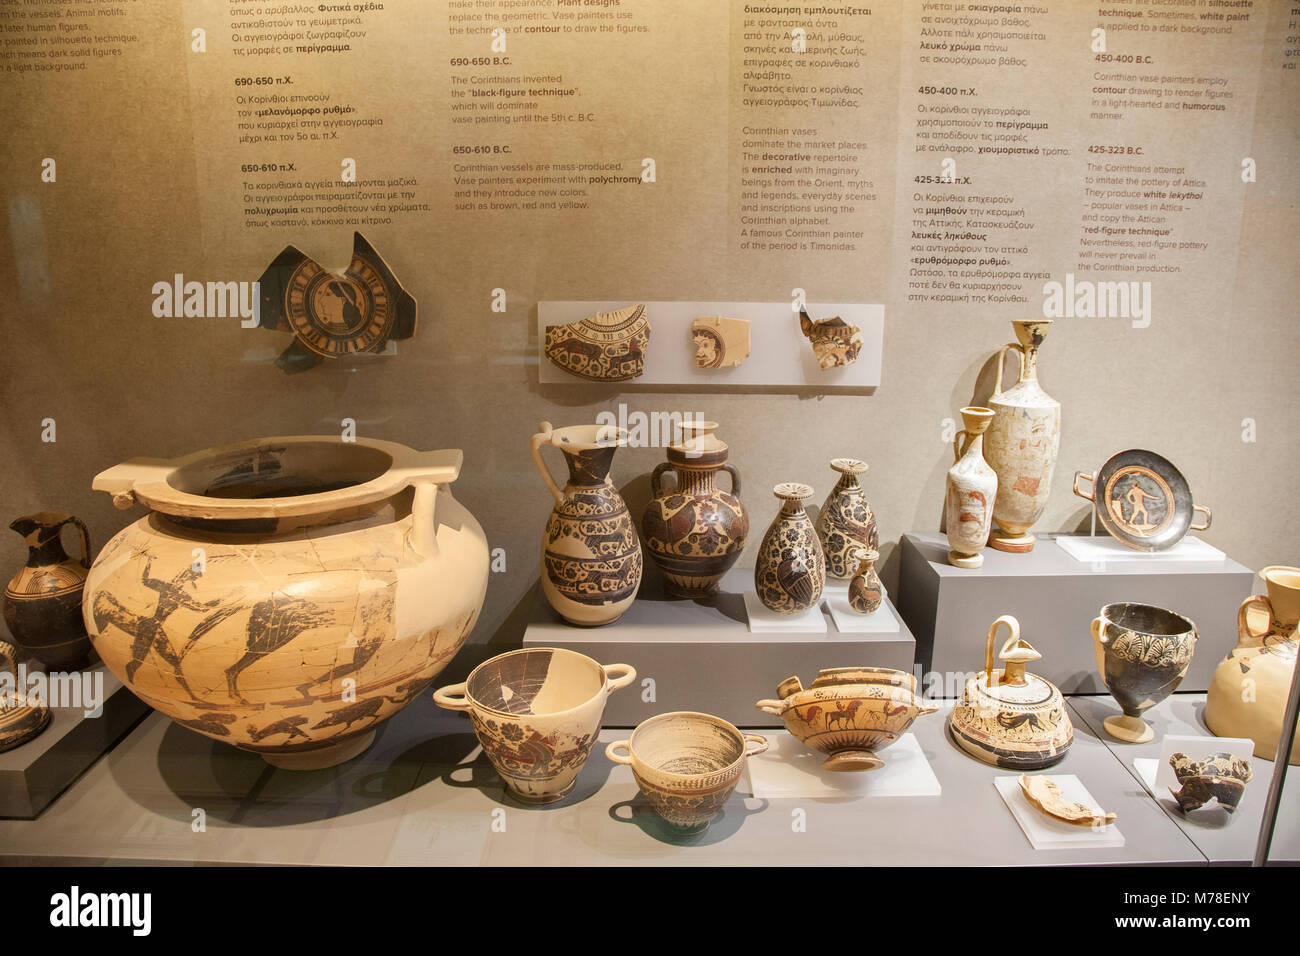 Europe, Greece, Peloponnese, ancient Corinth, archaeological site, Archaeological museum, finds from archaic period 720-610 B.C Stock Photo